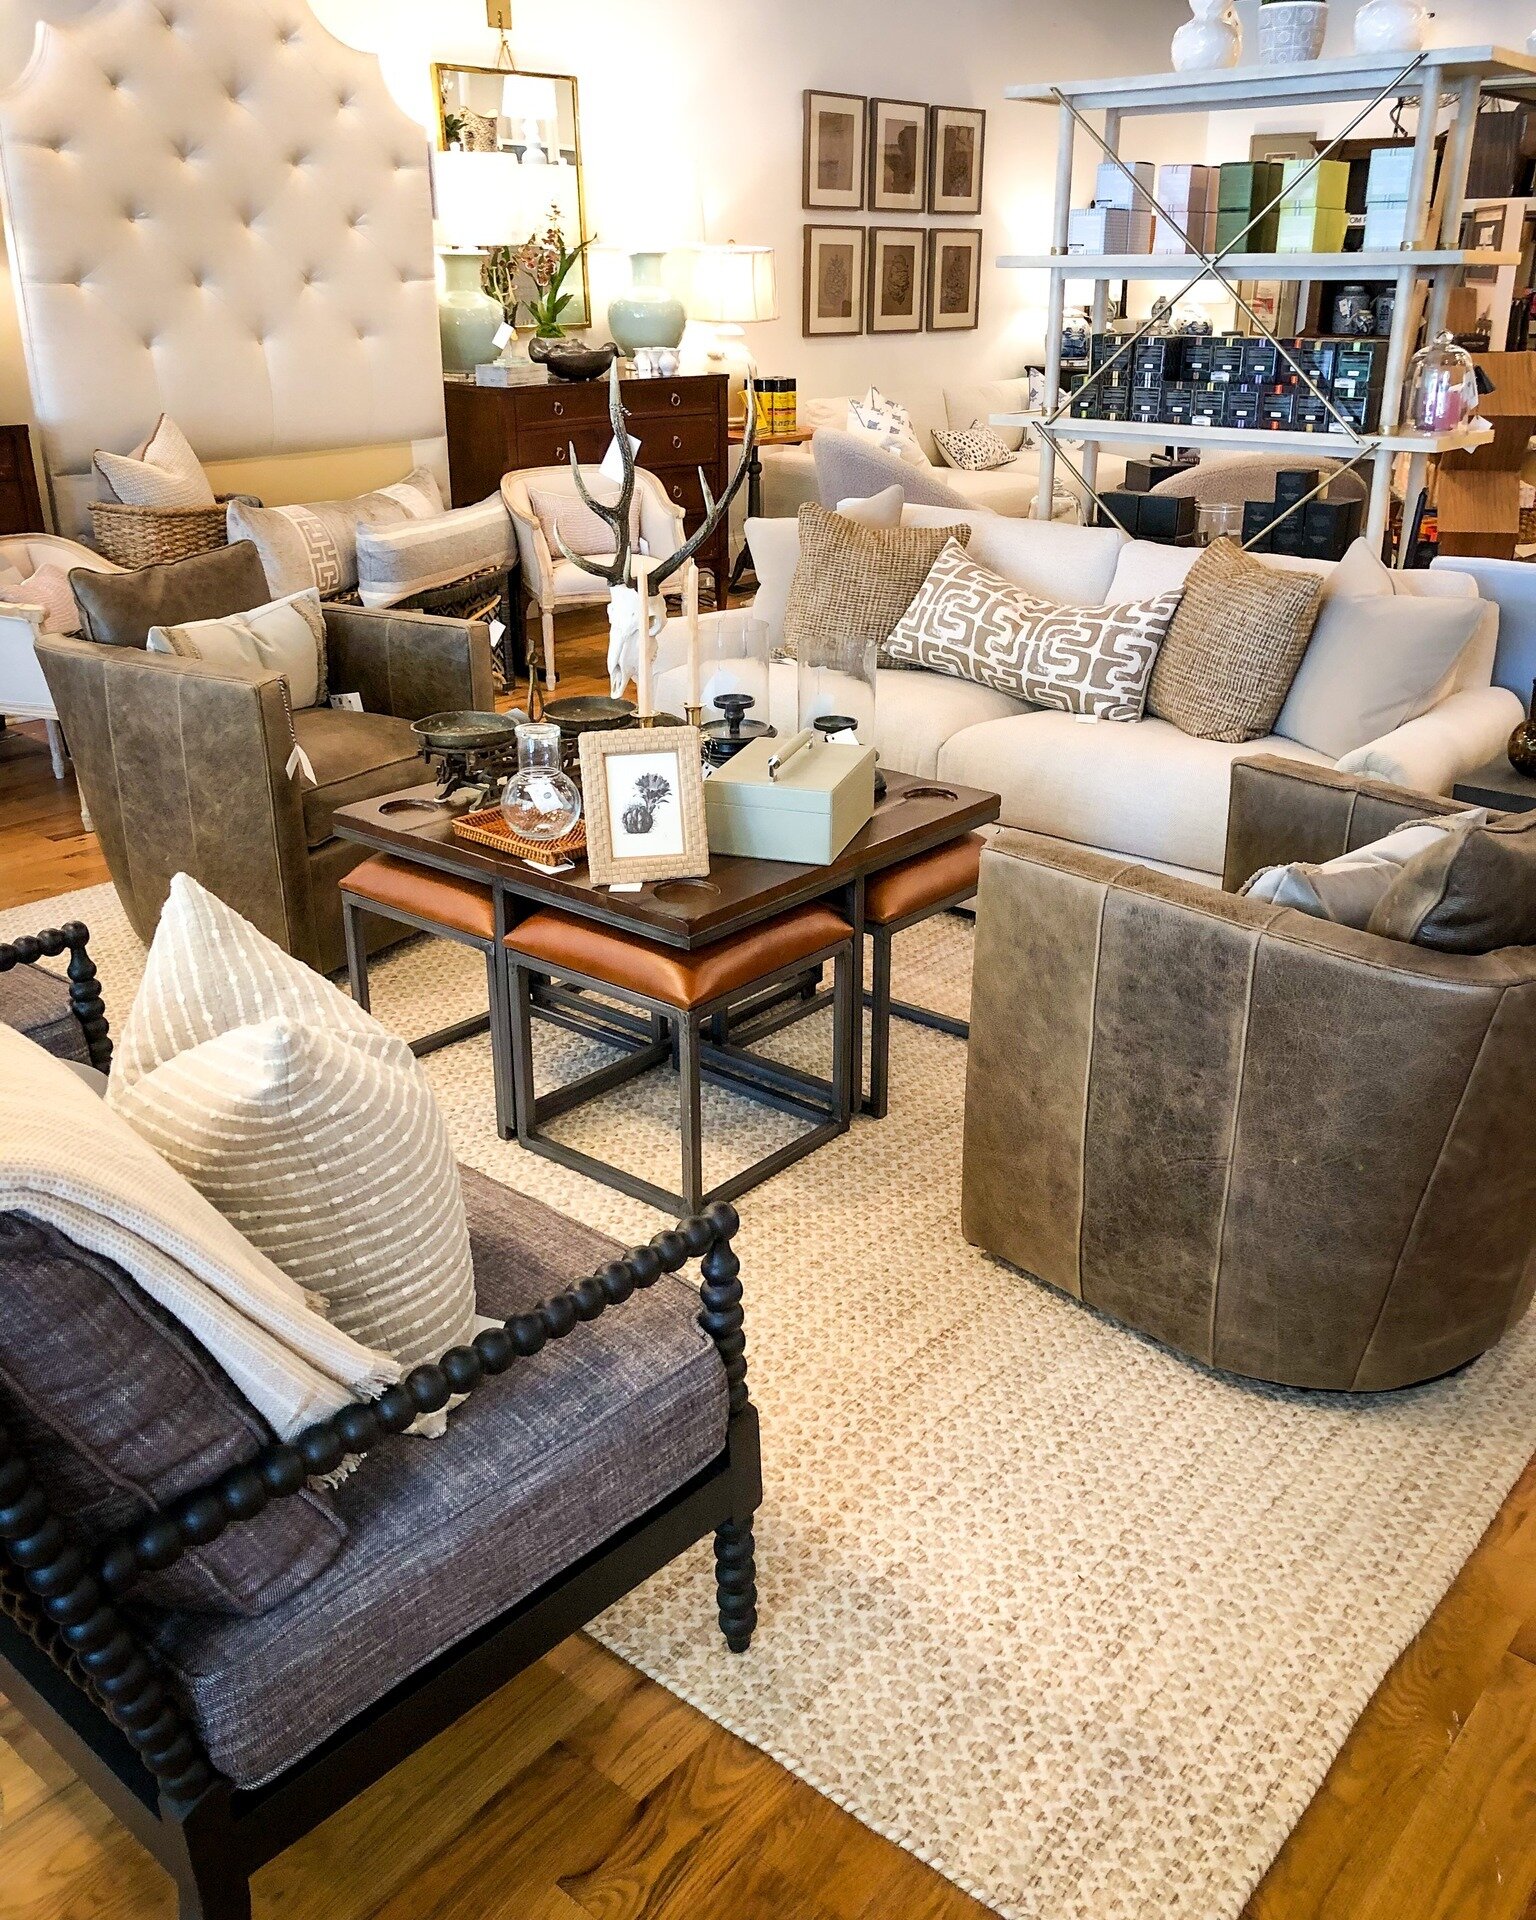 We can't get enough of this seating section on the showroom floor at the moment. So inviting, it reminds us of a cozy living room we'd love to settle down in after a long day on the lake. Stop in to try out some of our popular swivel chairs and sofas